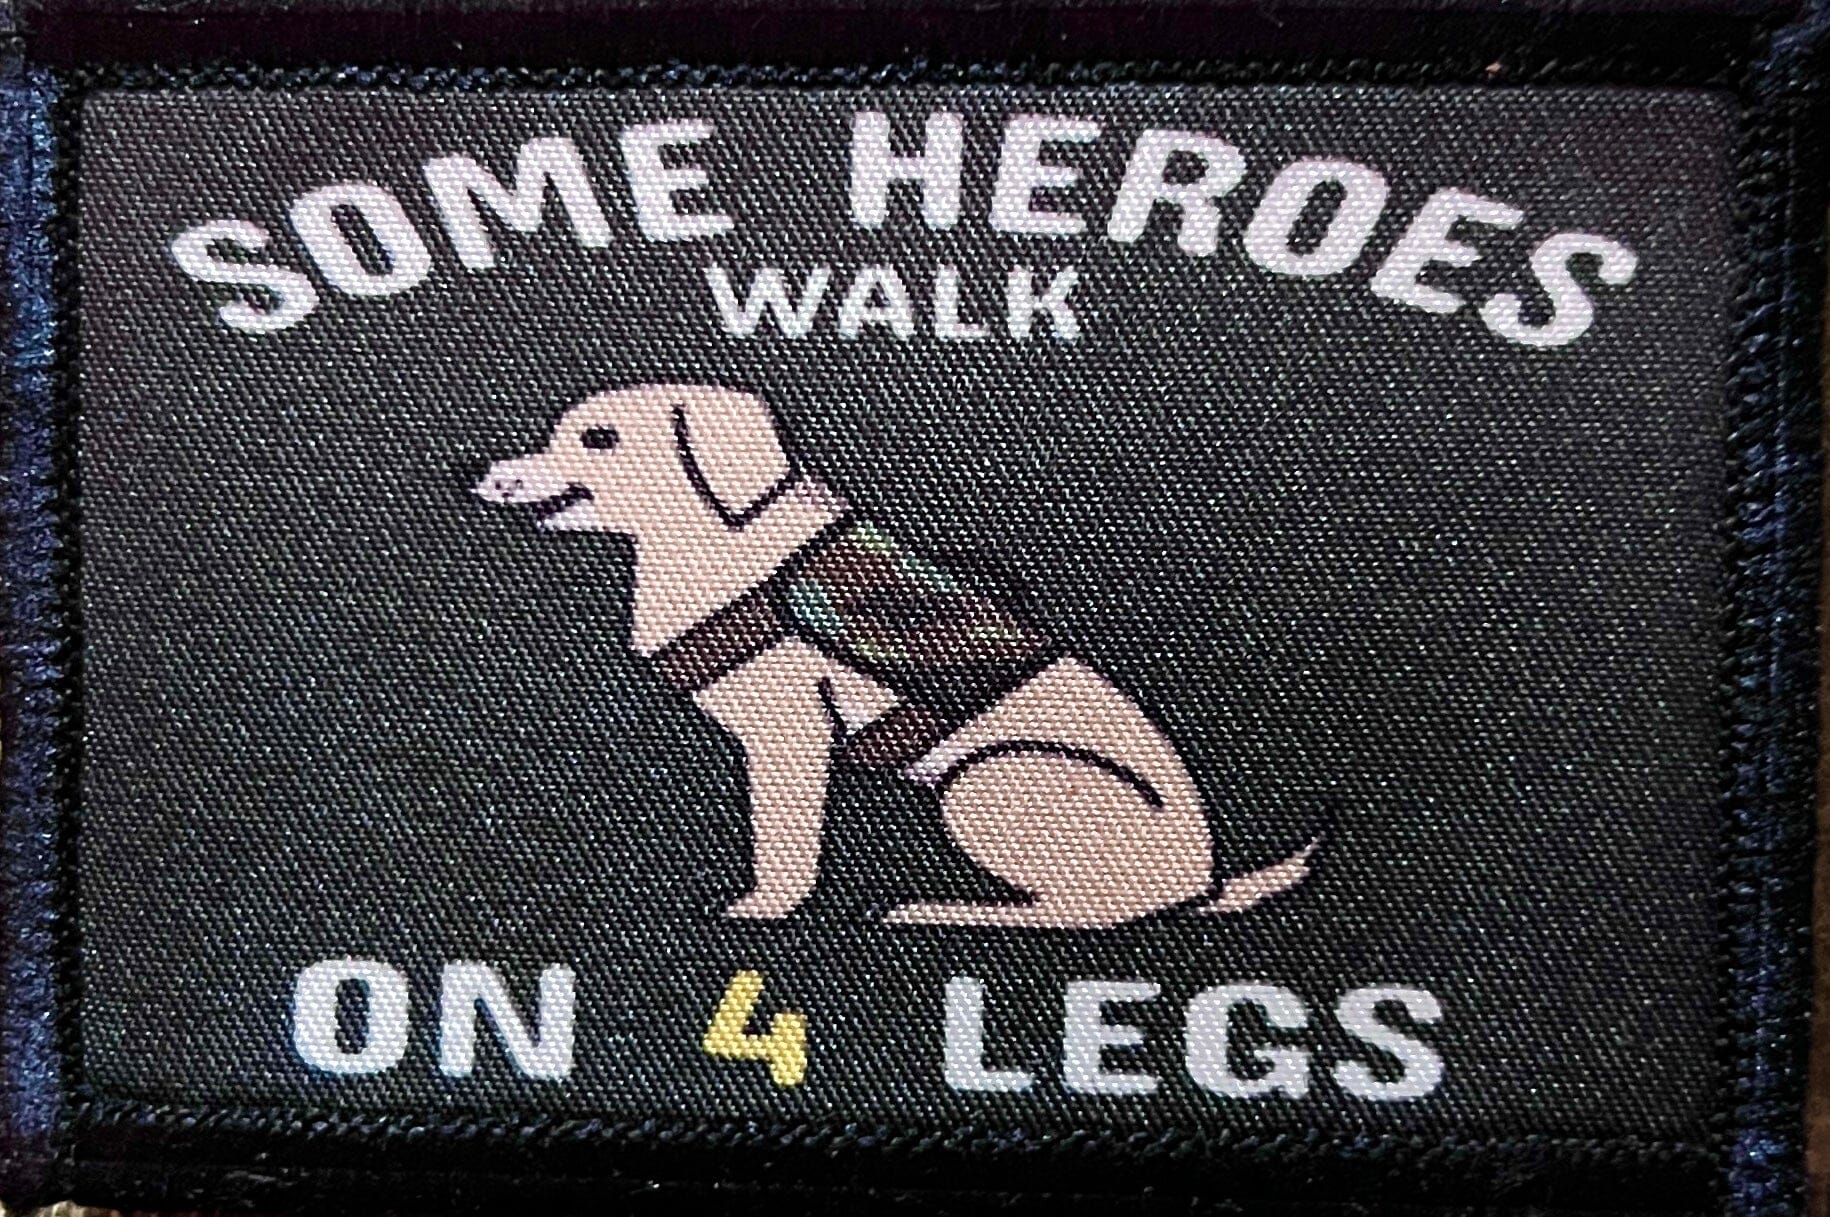 Some Heroes Walk on 4 Legs Service Dog Morale Patch